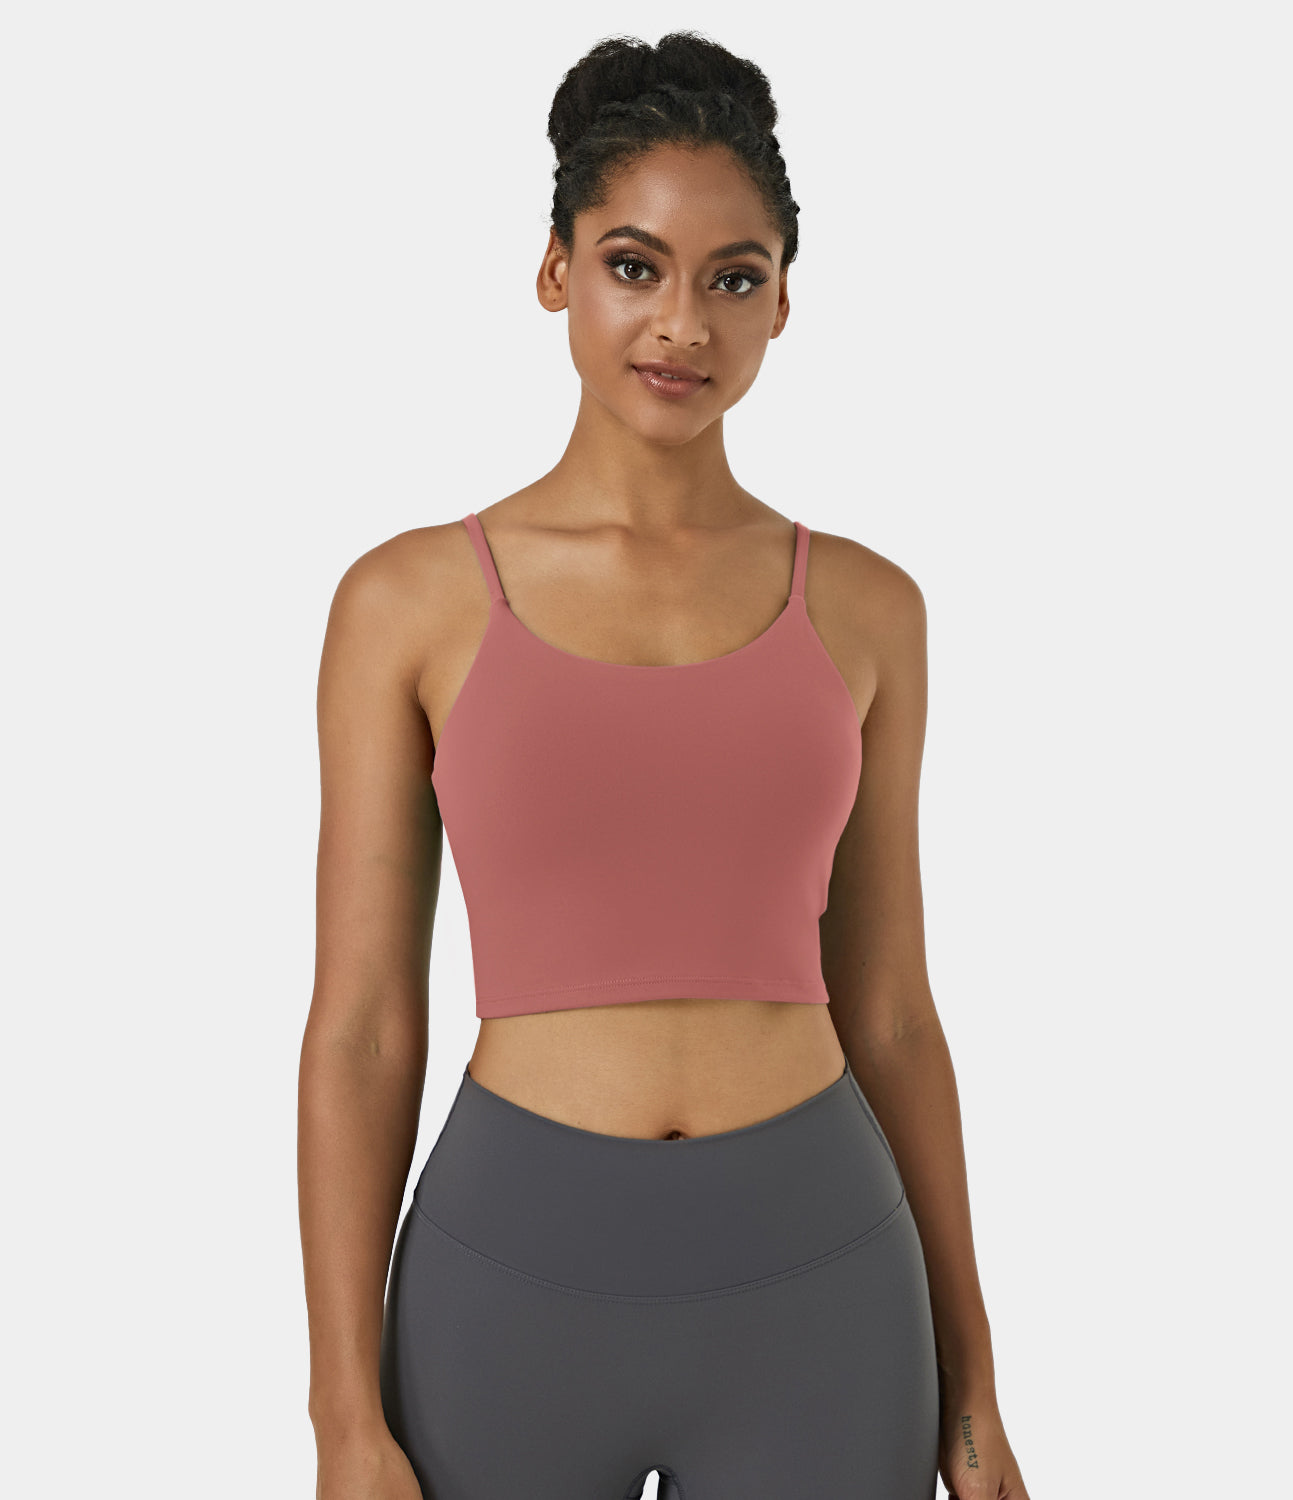 

Halara Basic Padded Workout Cropped Tank Top Tank Top - Dusty Rose -  golf tops halter top tunic tops sleeveless tops backless top